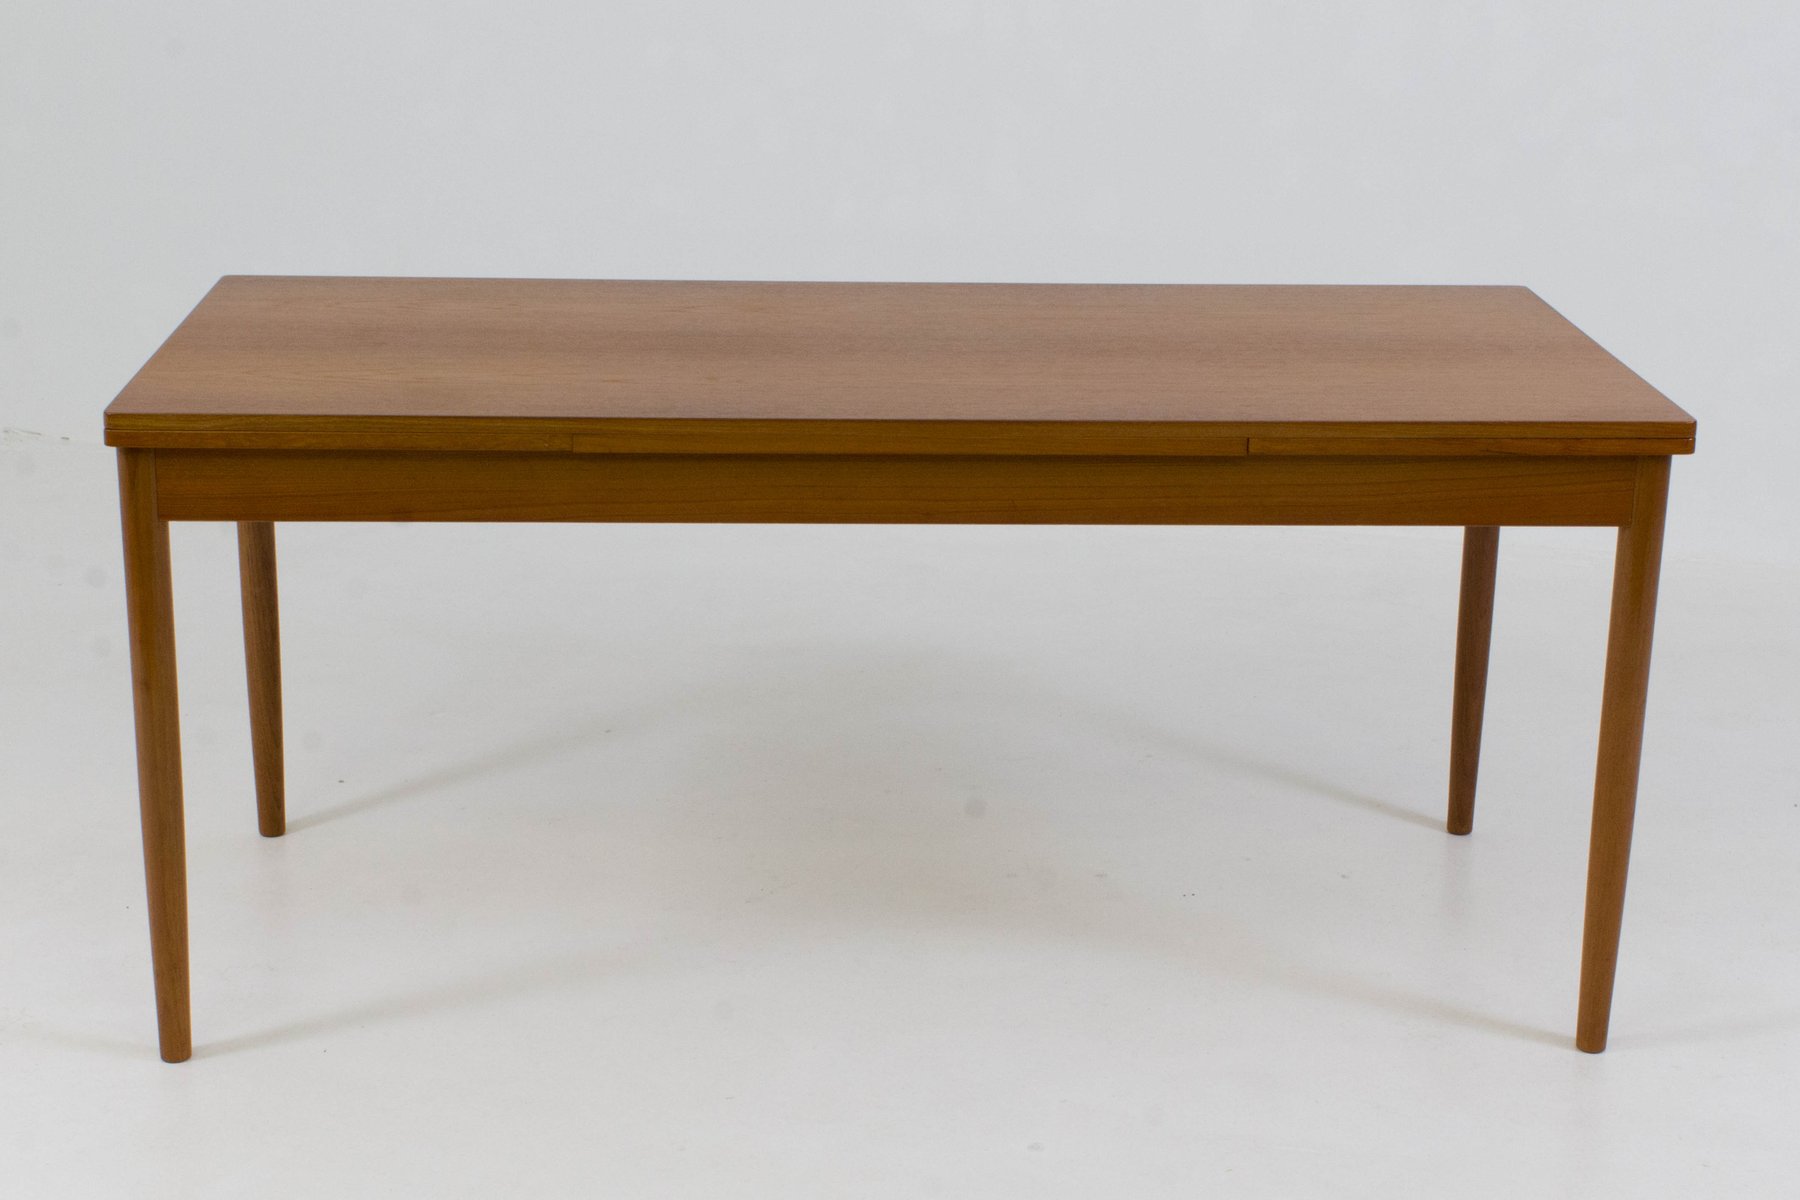 Large Danish Extending Dining Table, 1960s for sale at Pamono